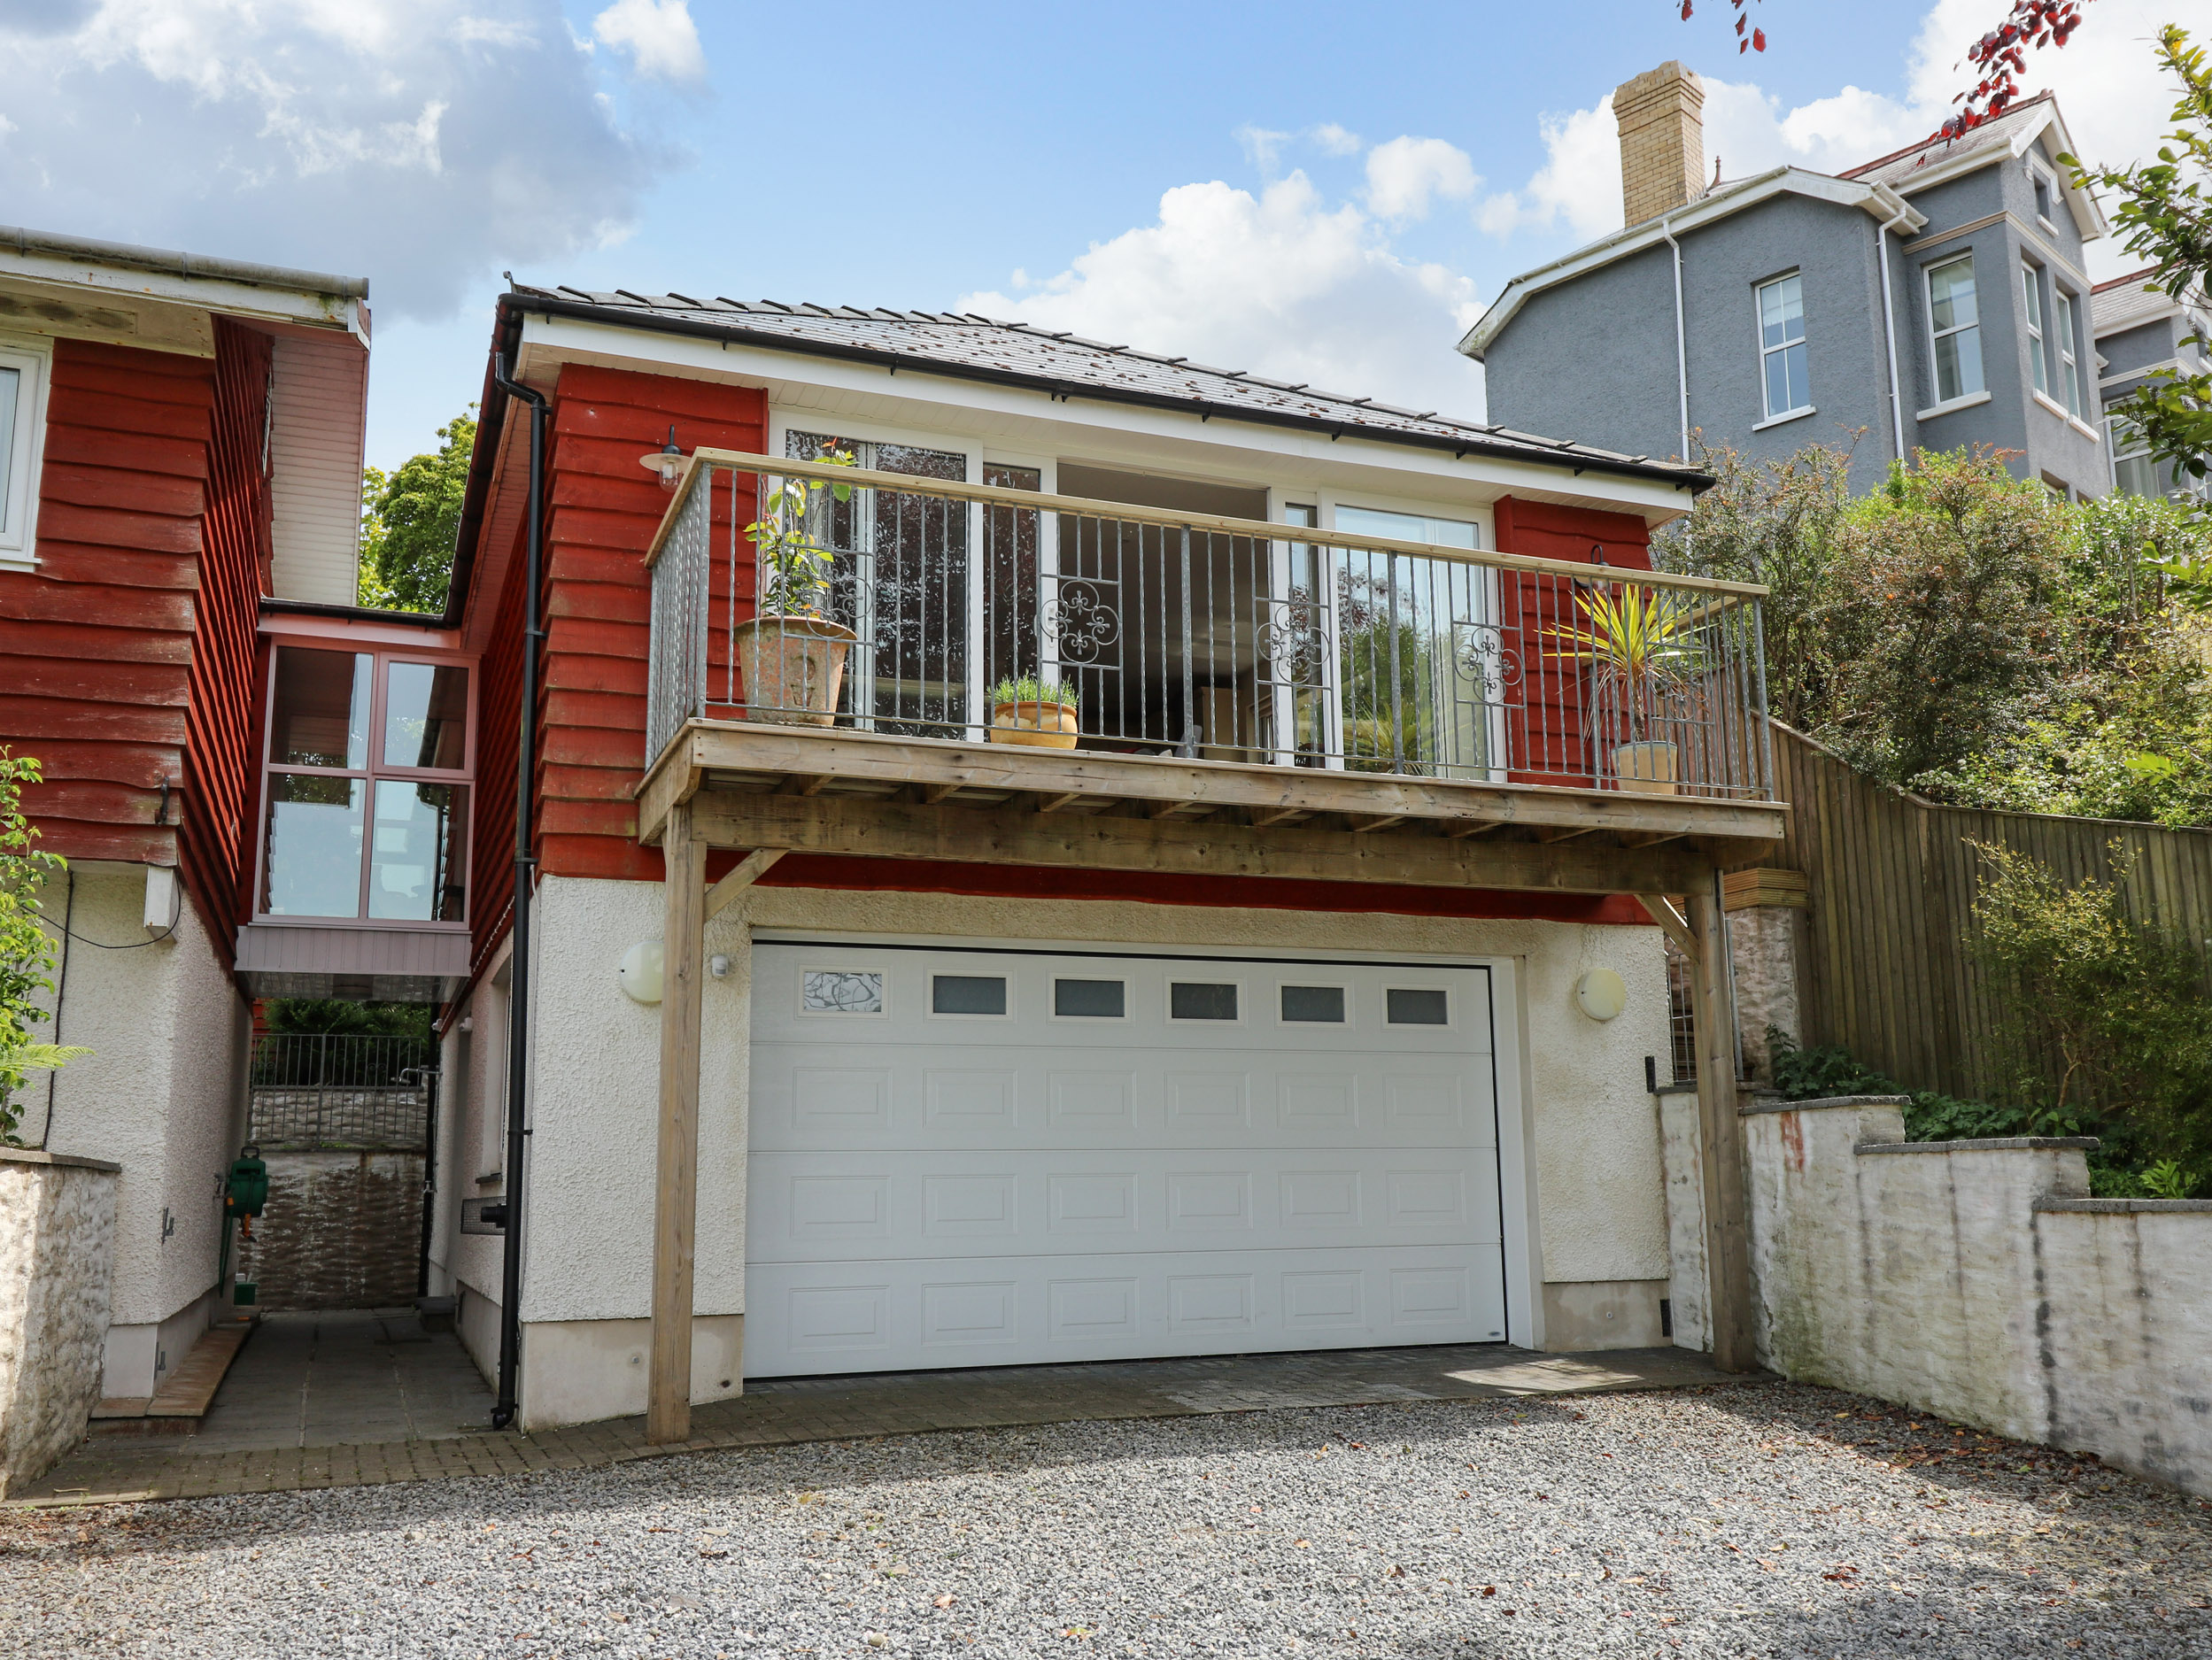 2 bedroom Cottage for rent in Aberporth